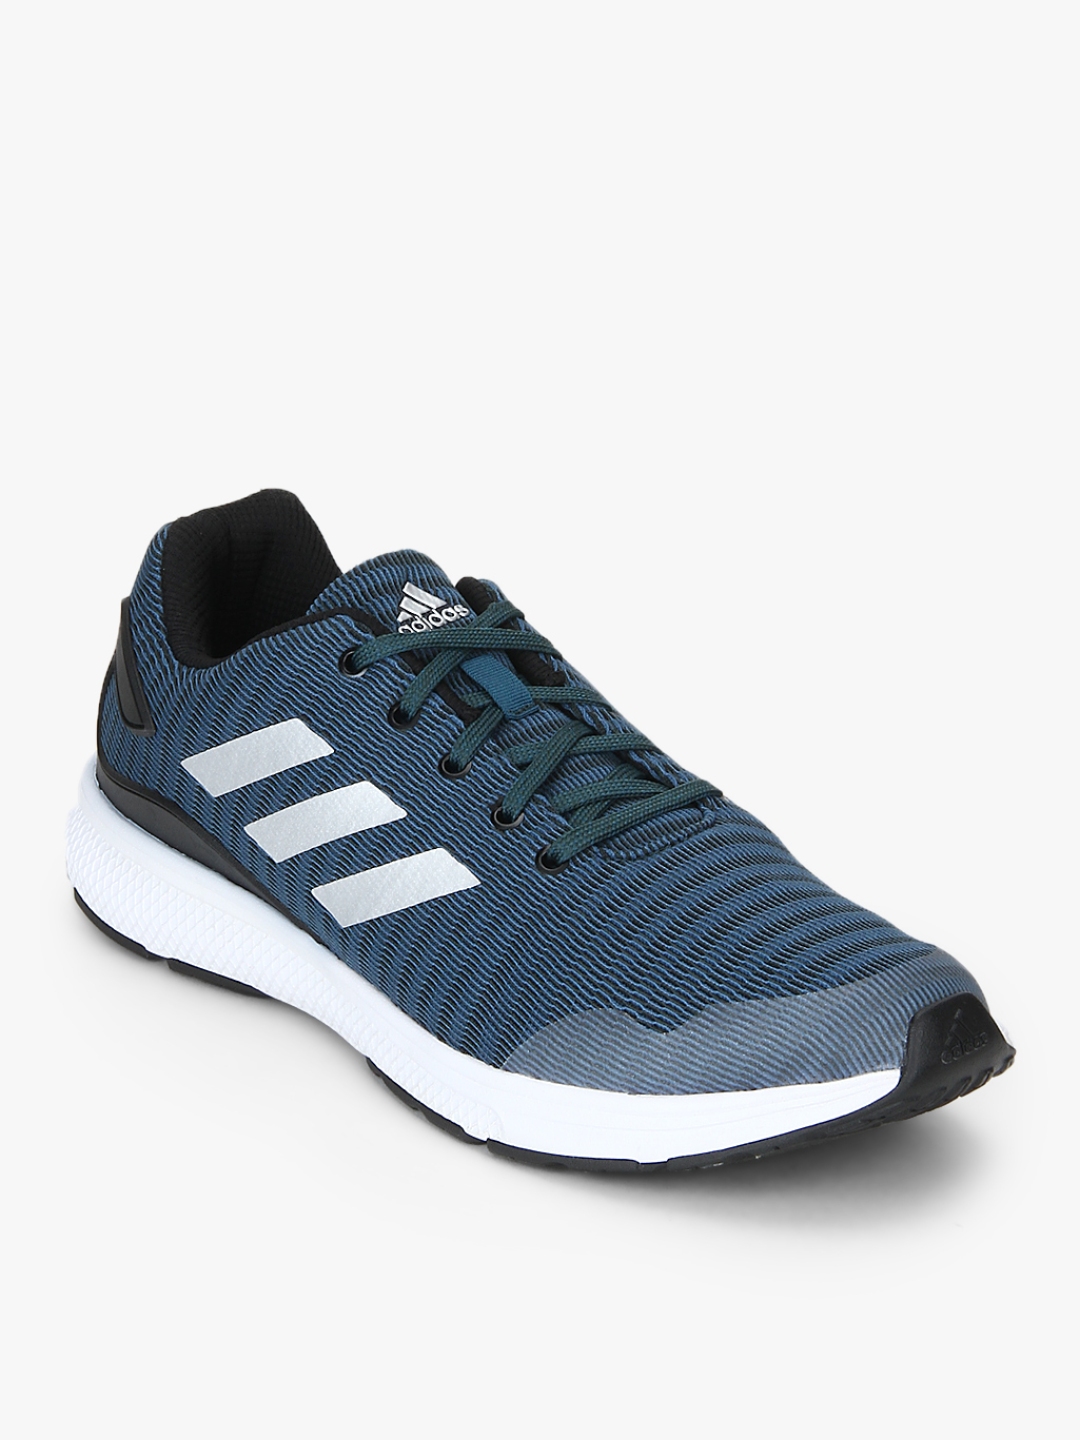 Buy Blue Running Shoes - Sports Shoes for Men 7634820 | Myntra